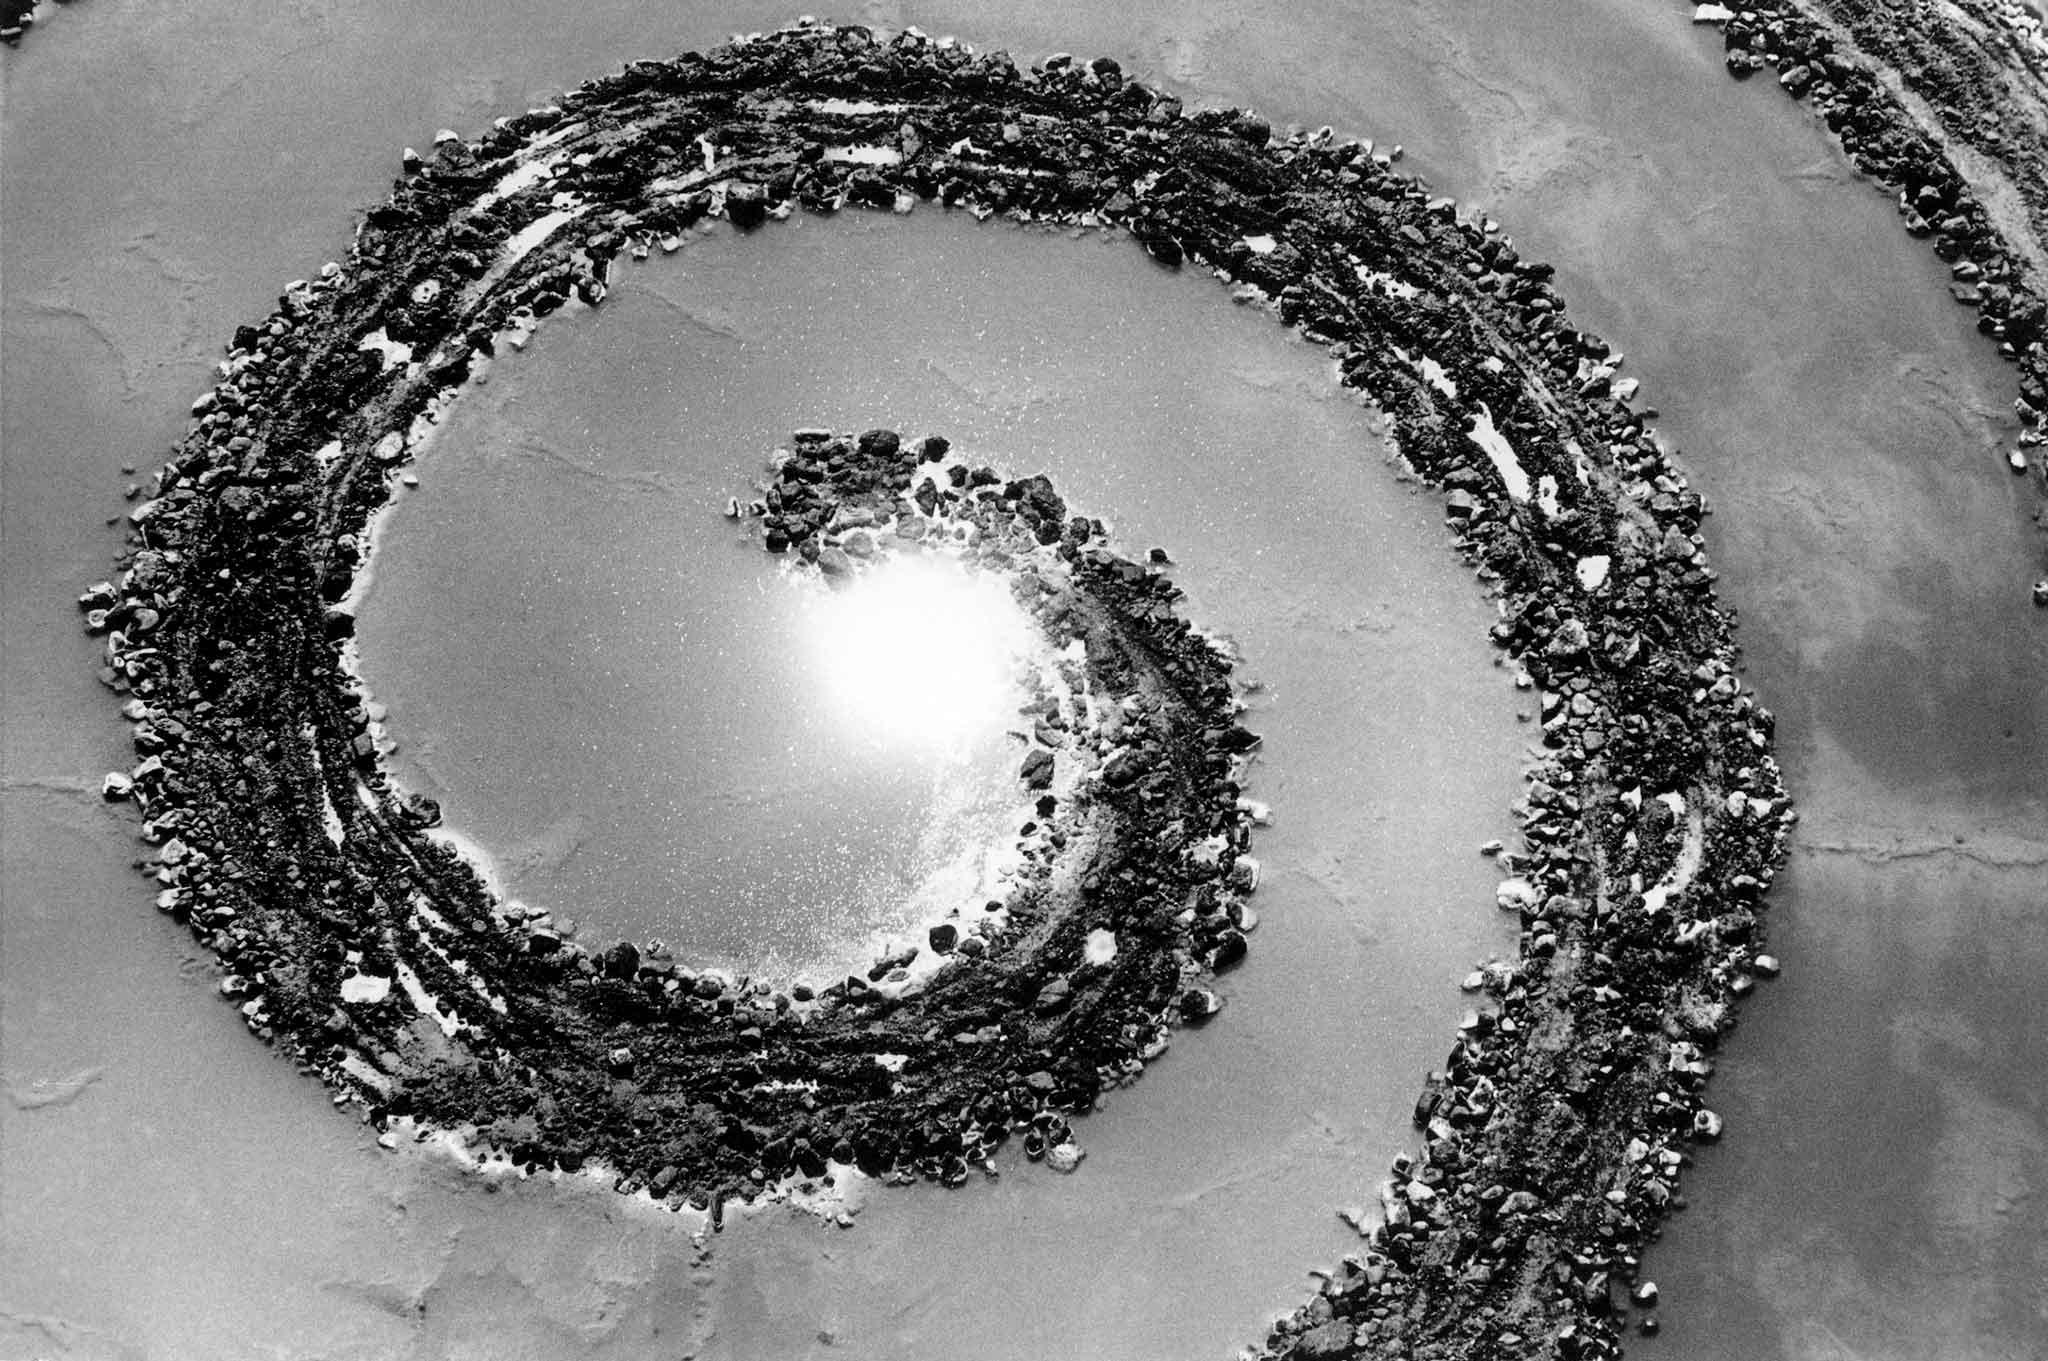 Robert Smithson's Spiral Jetty photographed from the air.